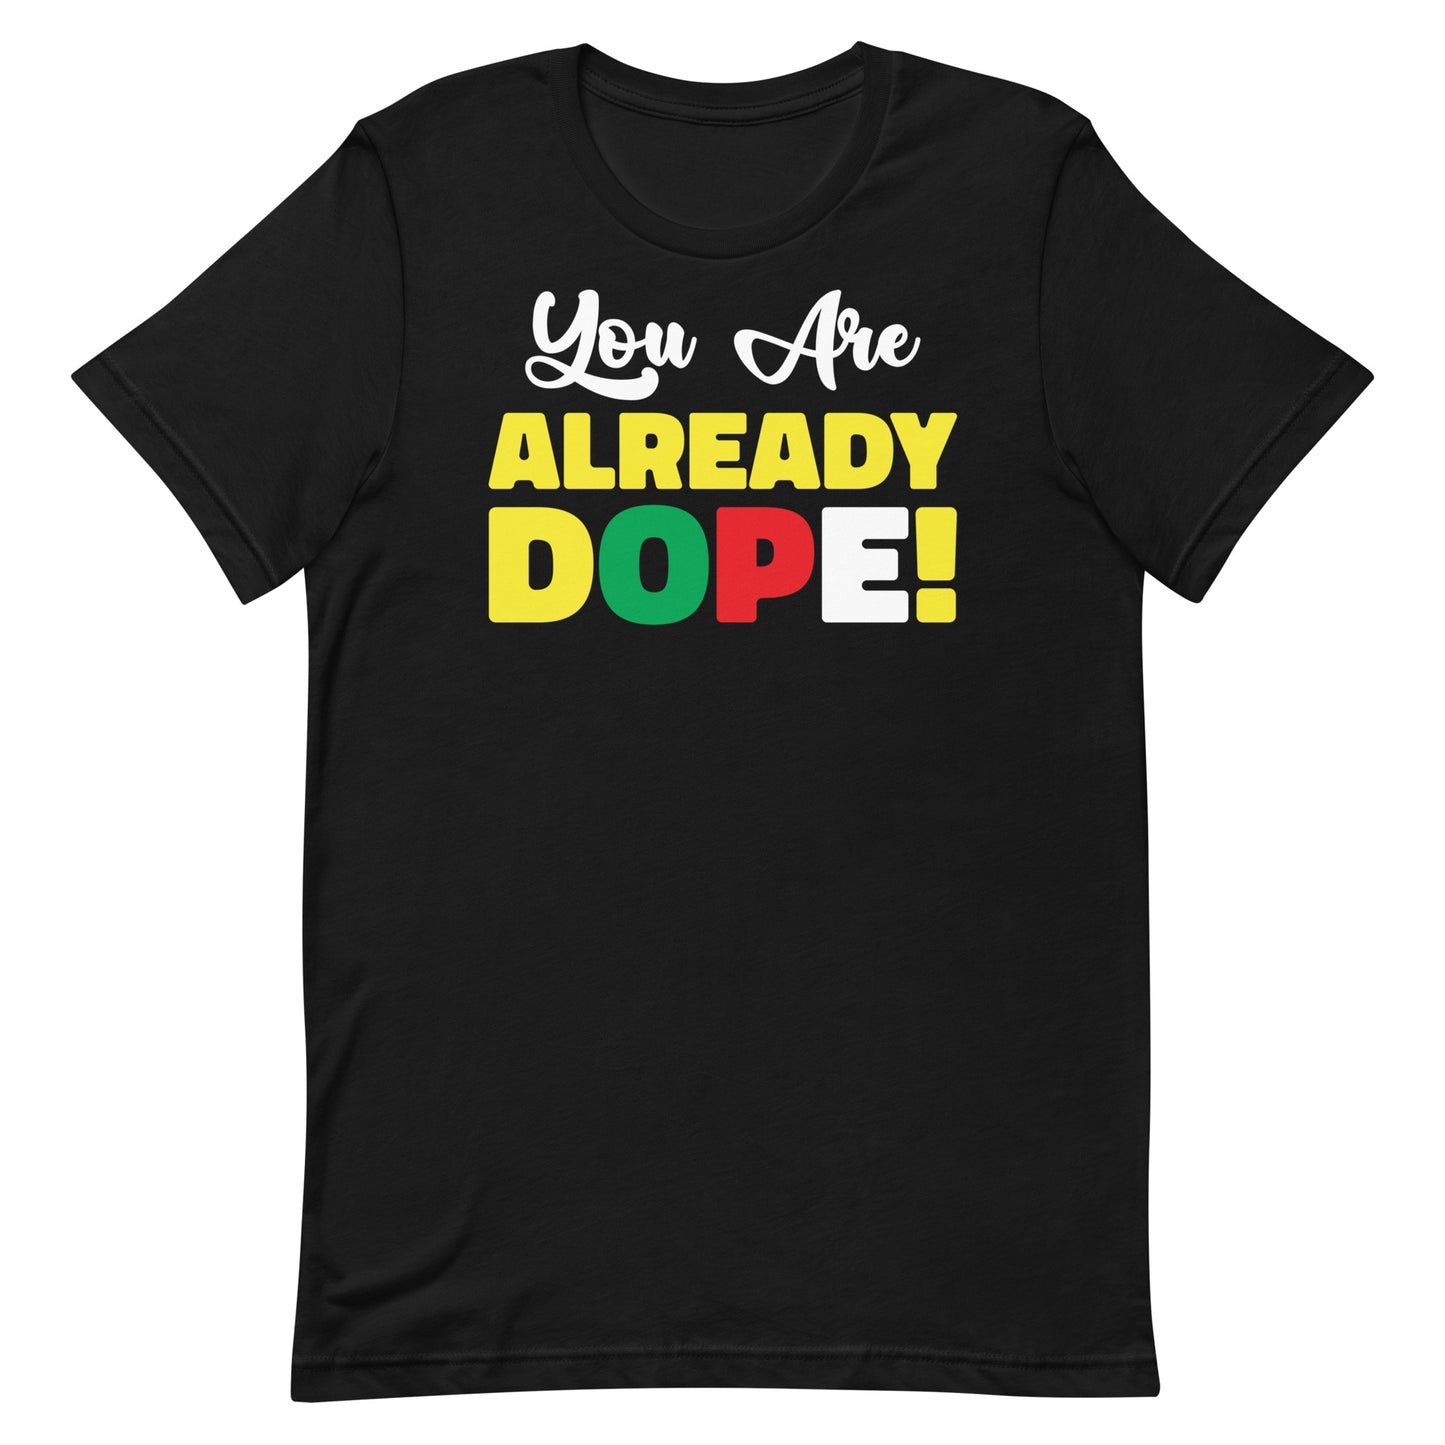 You are Already DOPE! T-Shirt